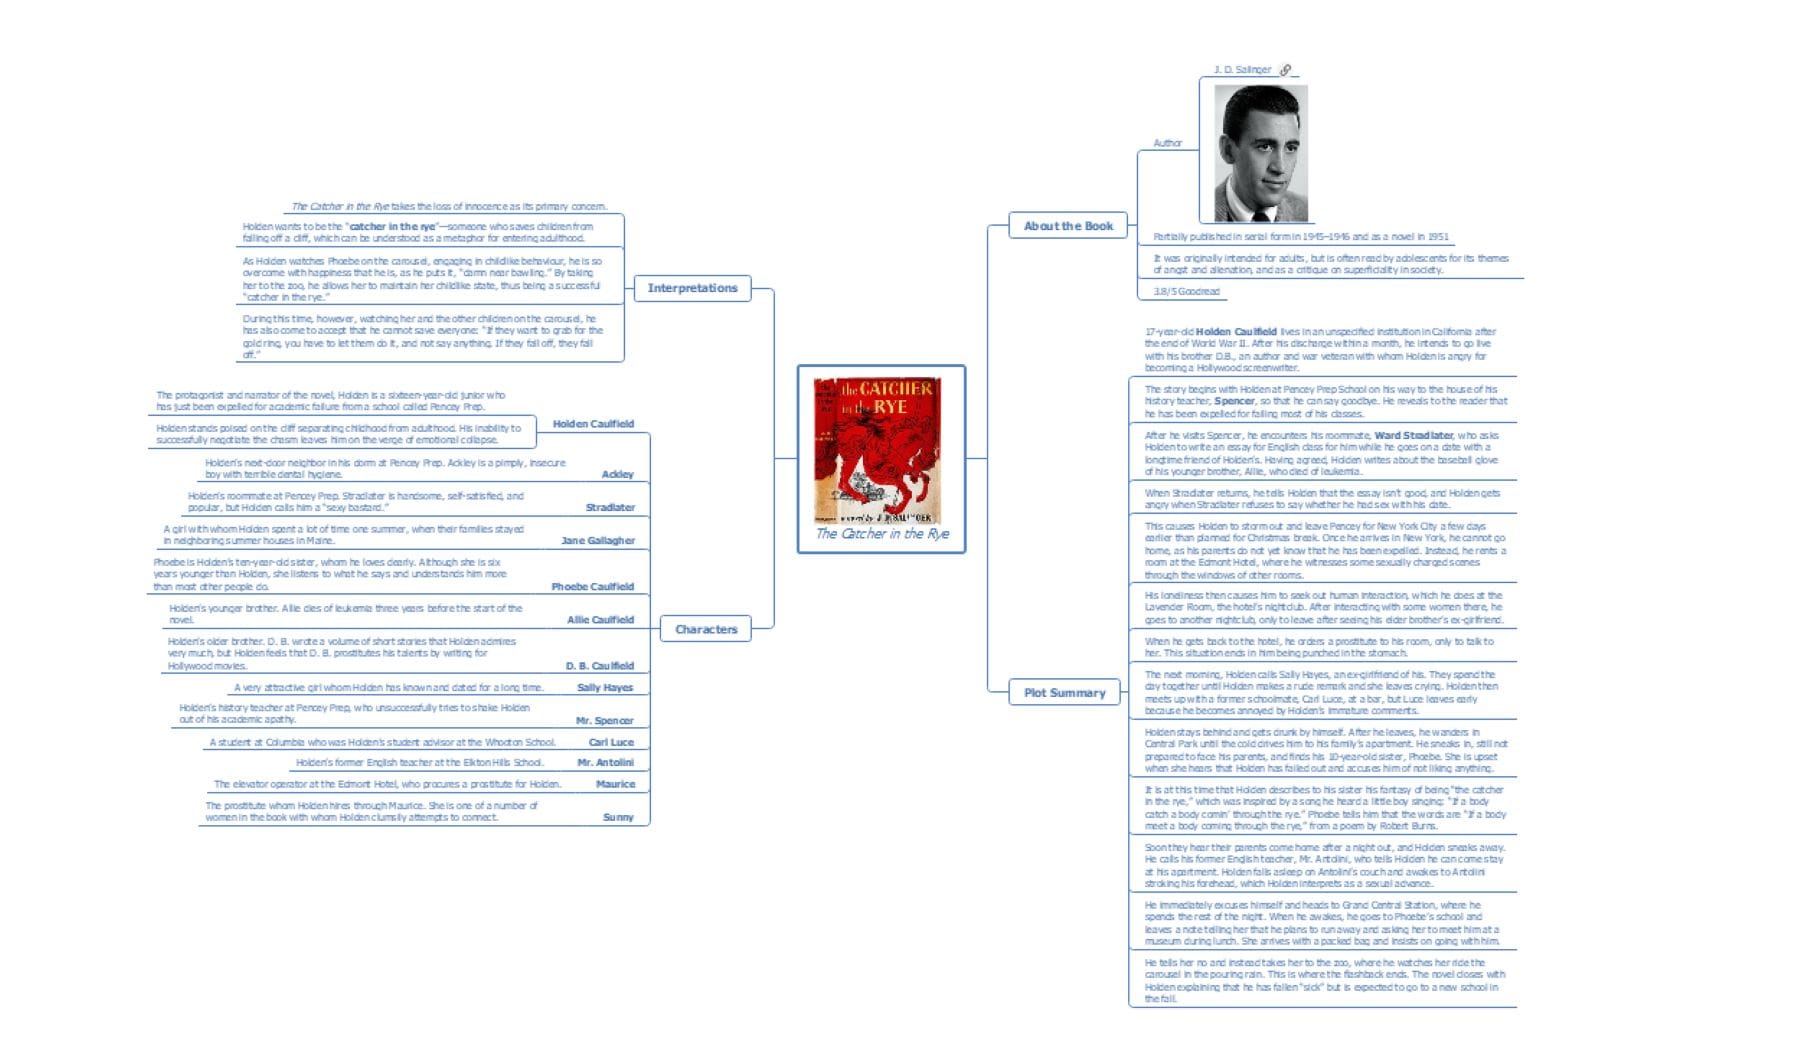 mind map summary of catcher in the rye book